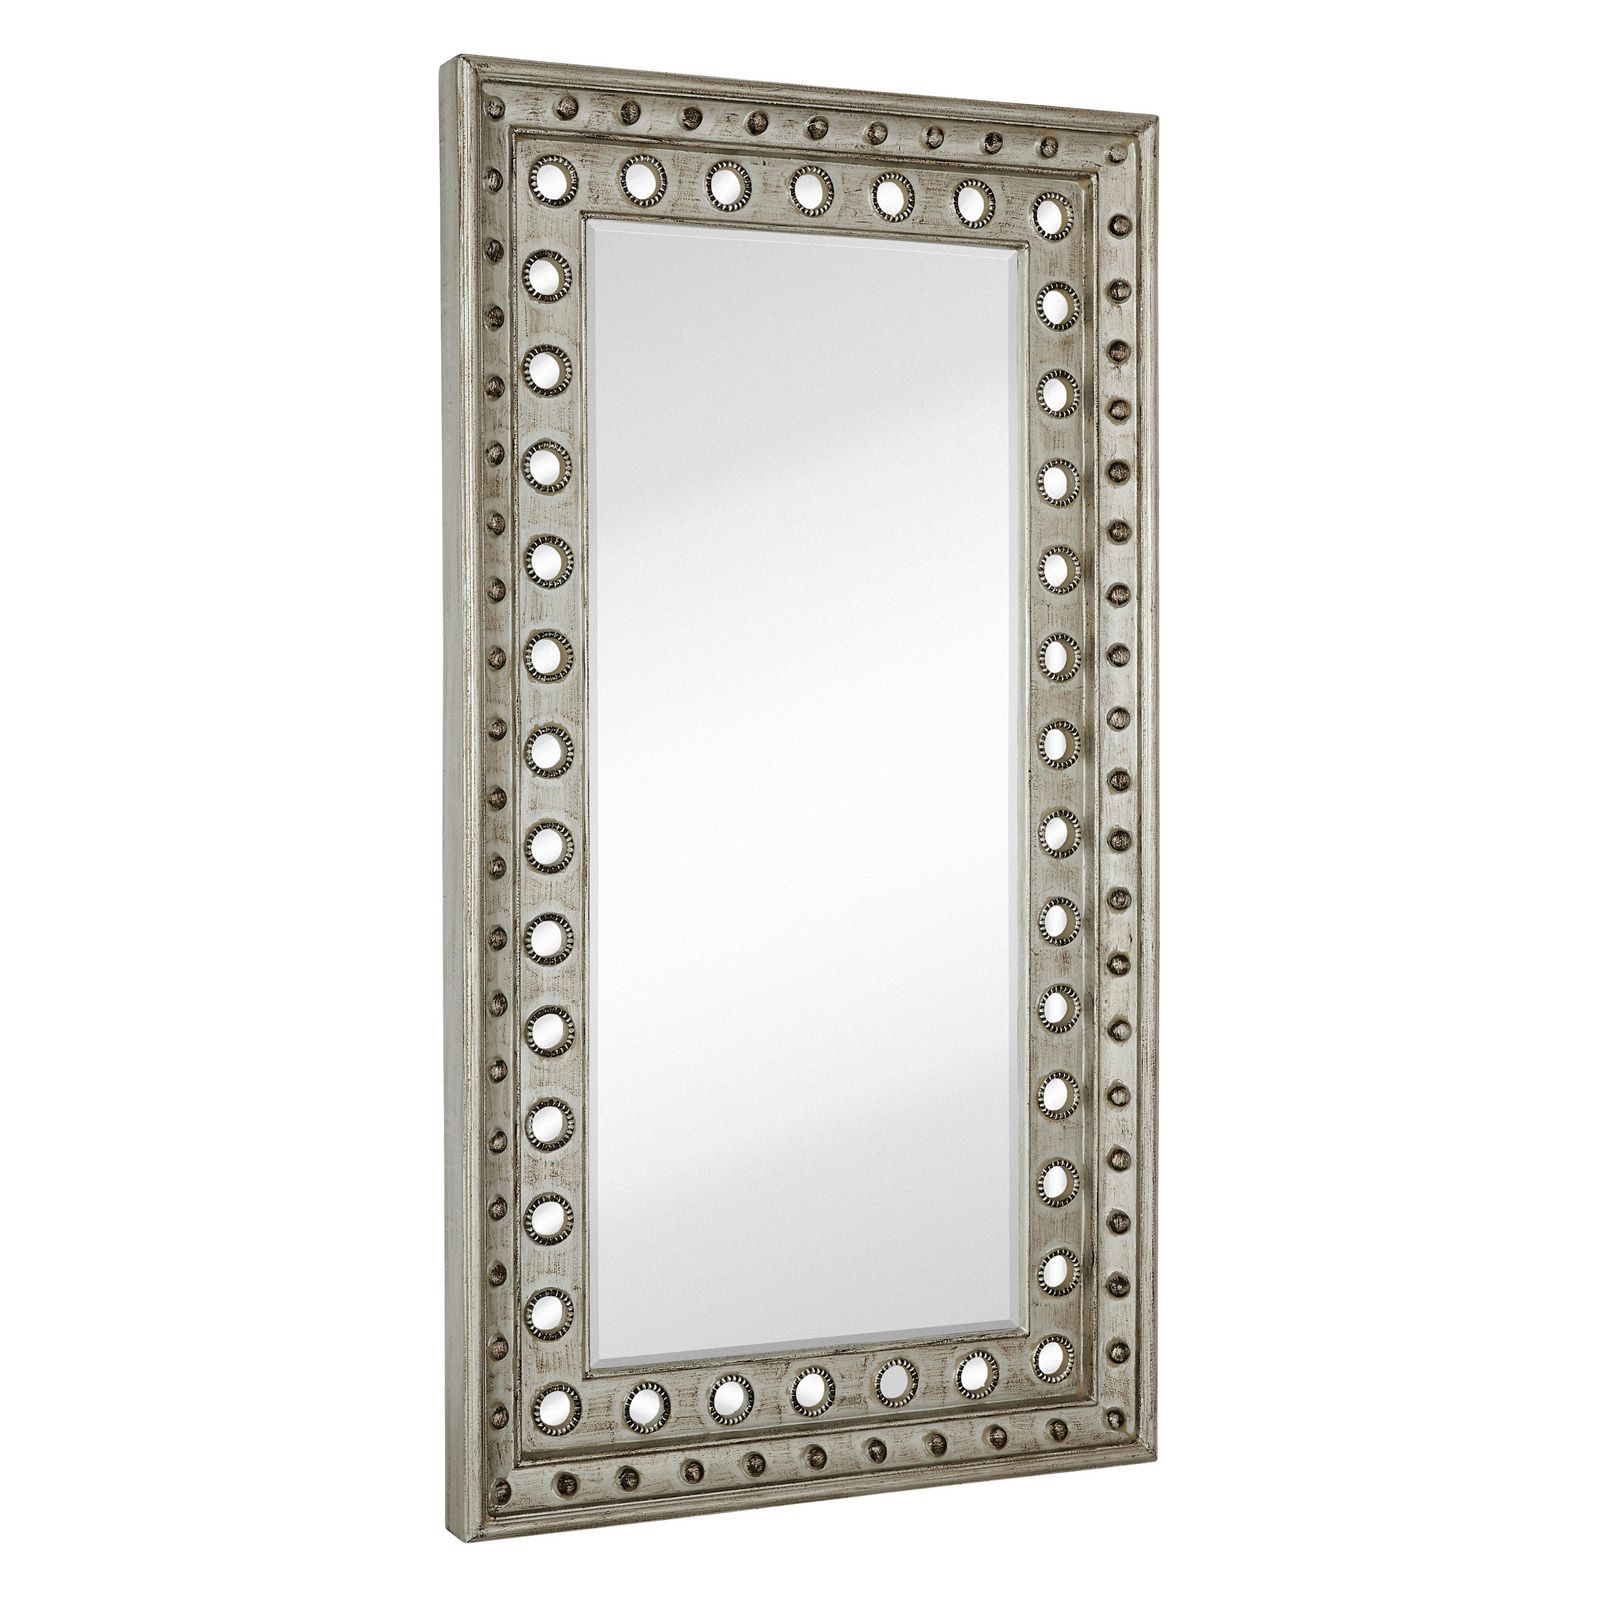 Majestic Huge Rectangular Beveled Glass Decorative Wall Mirror Throughout Rectangle Plastic Beveled Wall Mirrors (View 14 of 15)